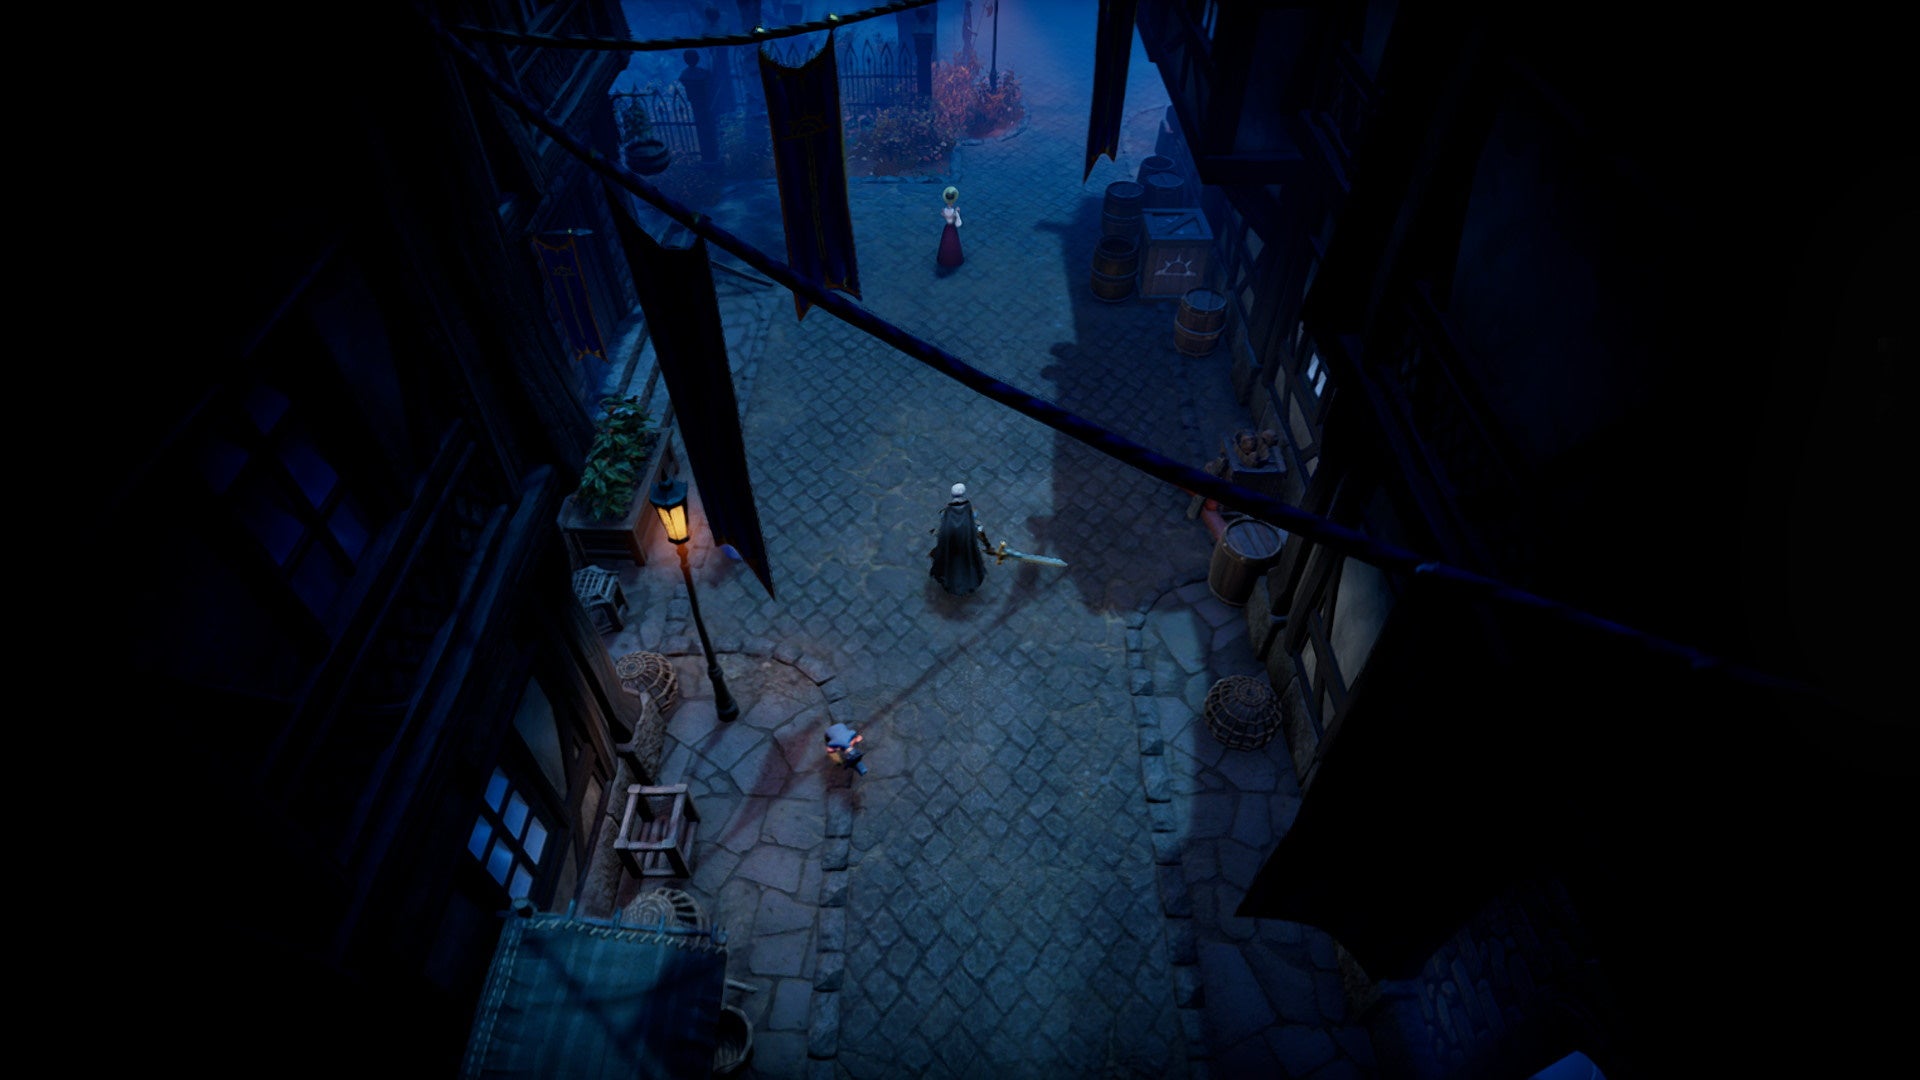 V Rising, a character is walking through stone streets holding a large sword beside them